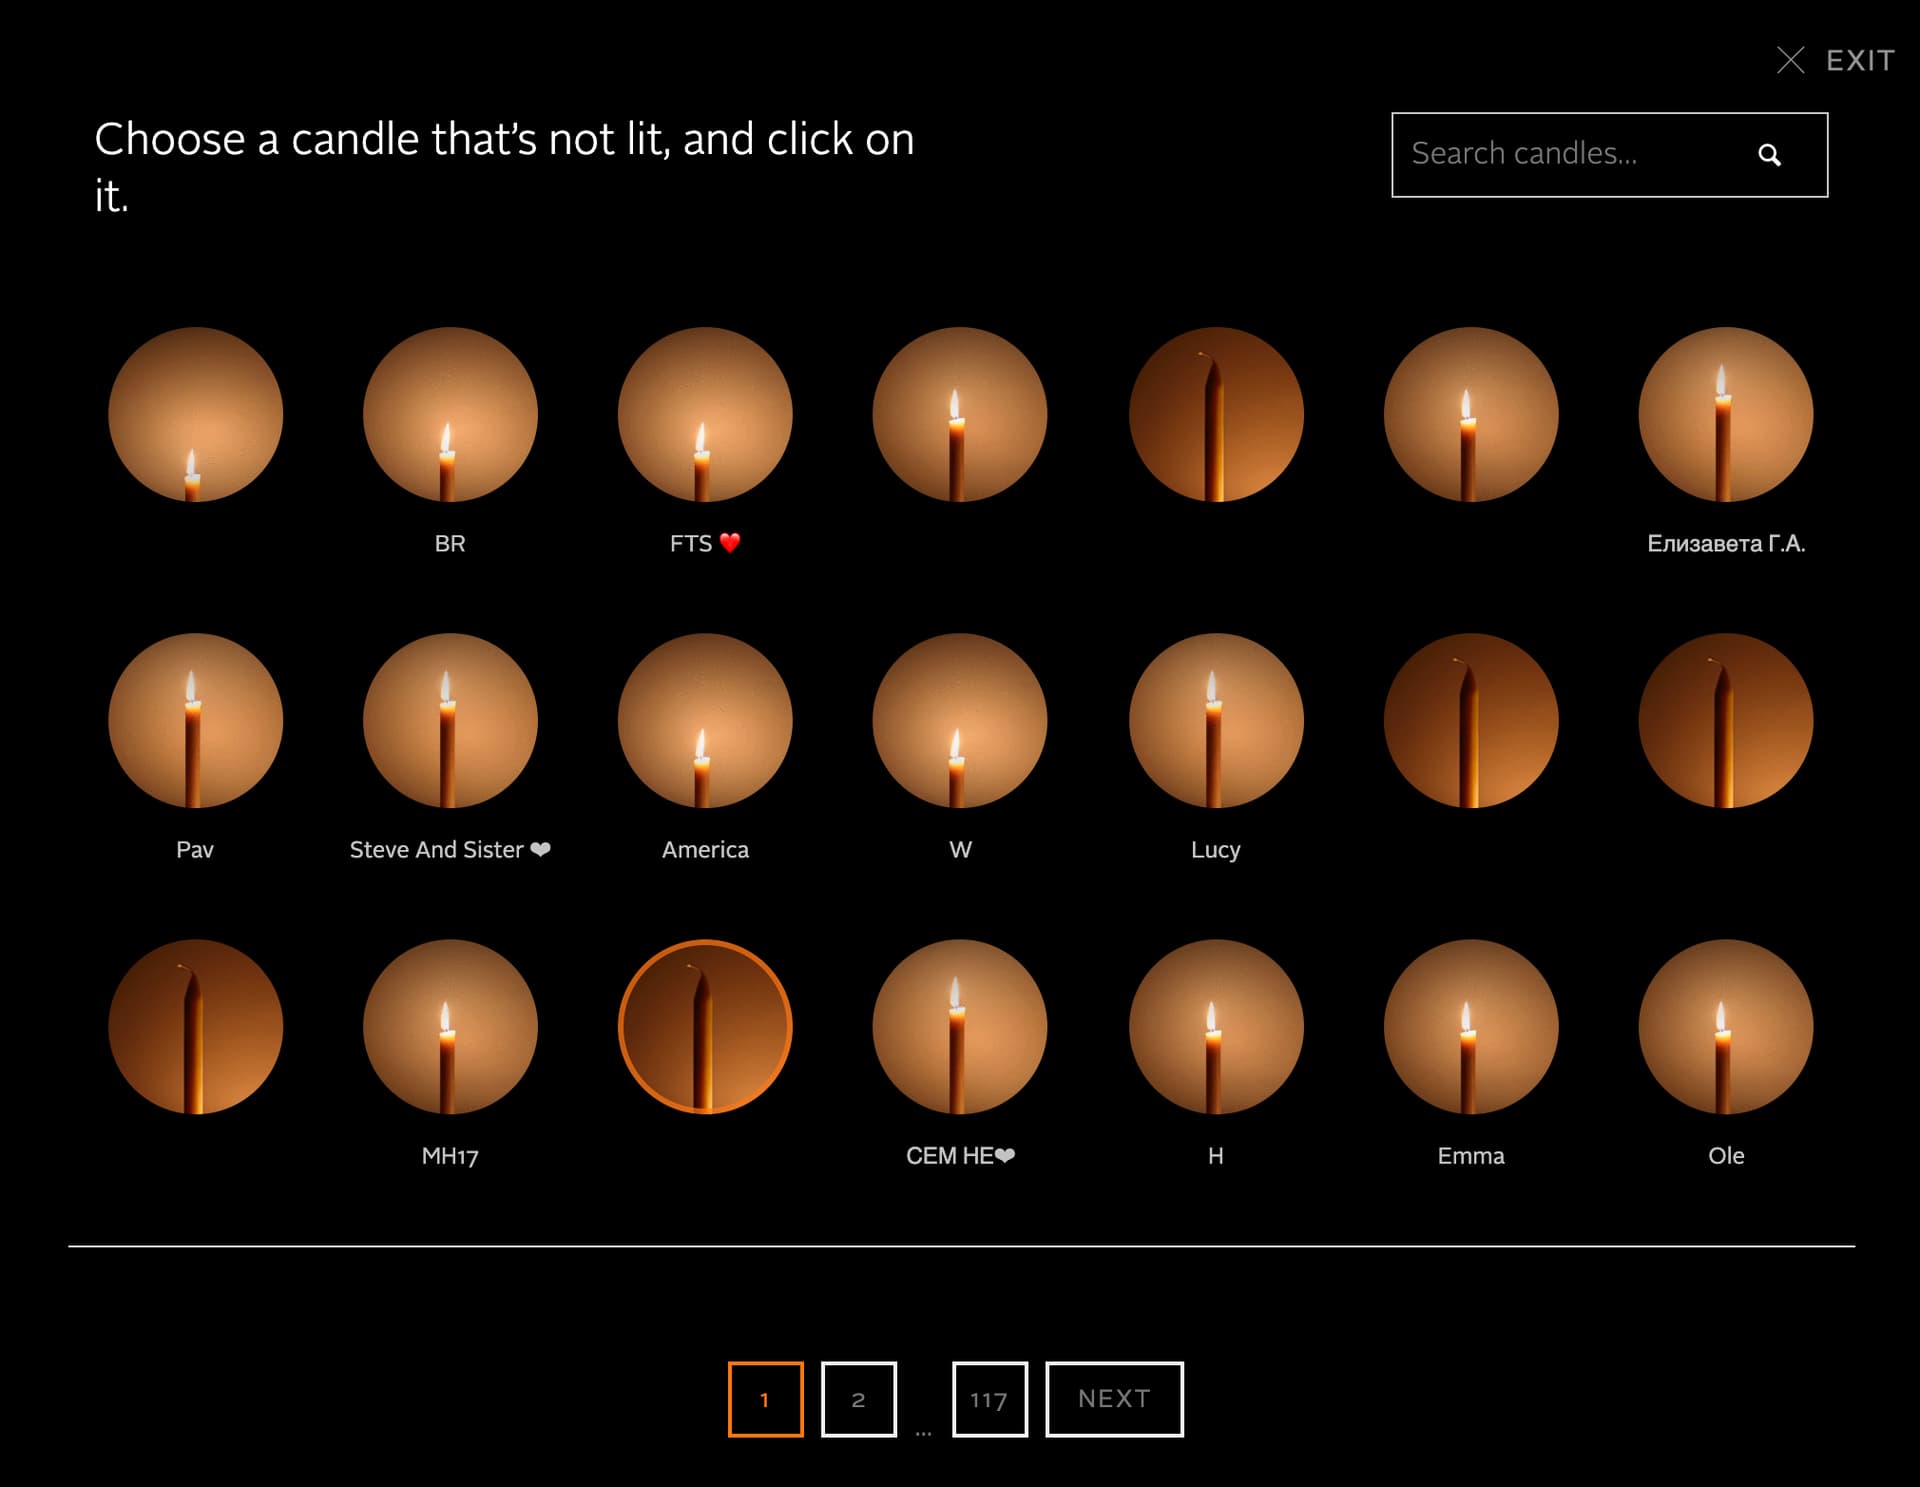 digital candle lighting — Choose a candle that is not lit and click on it.